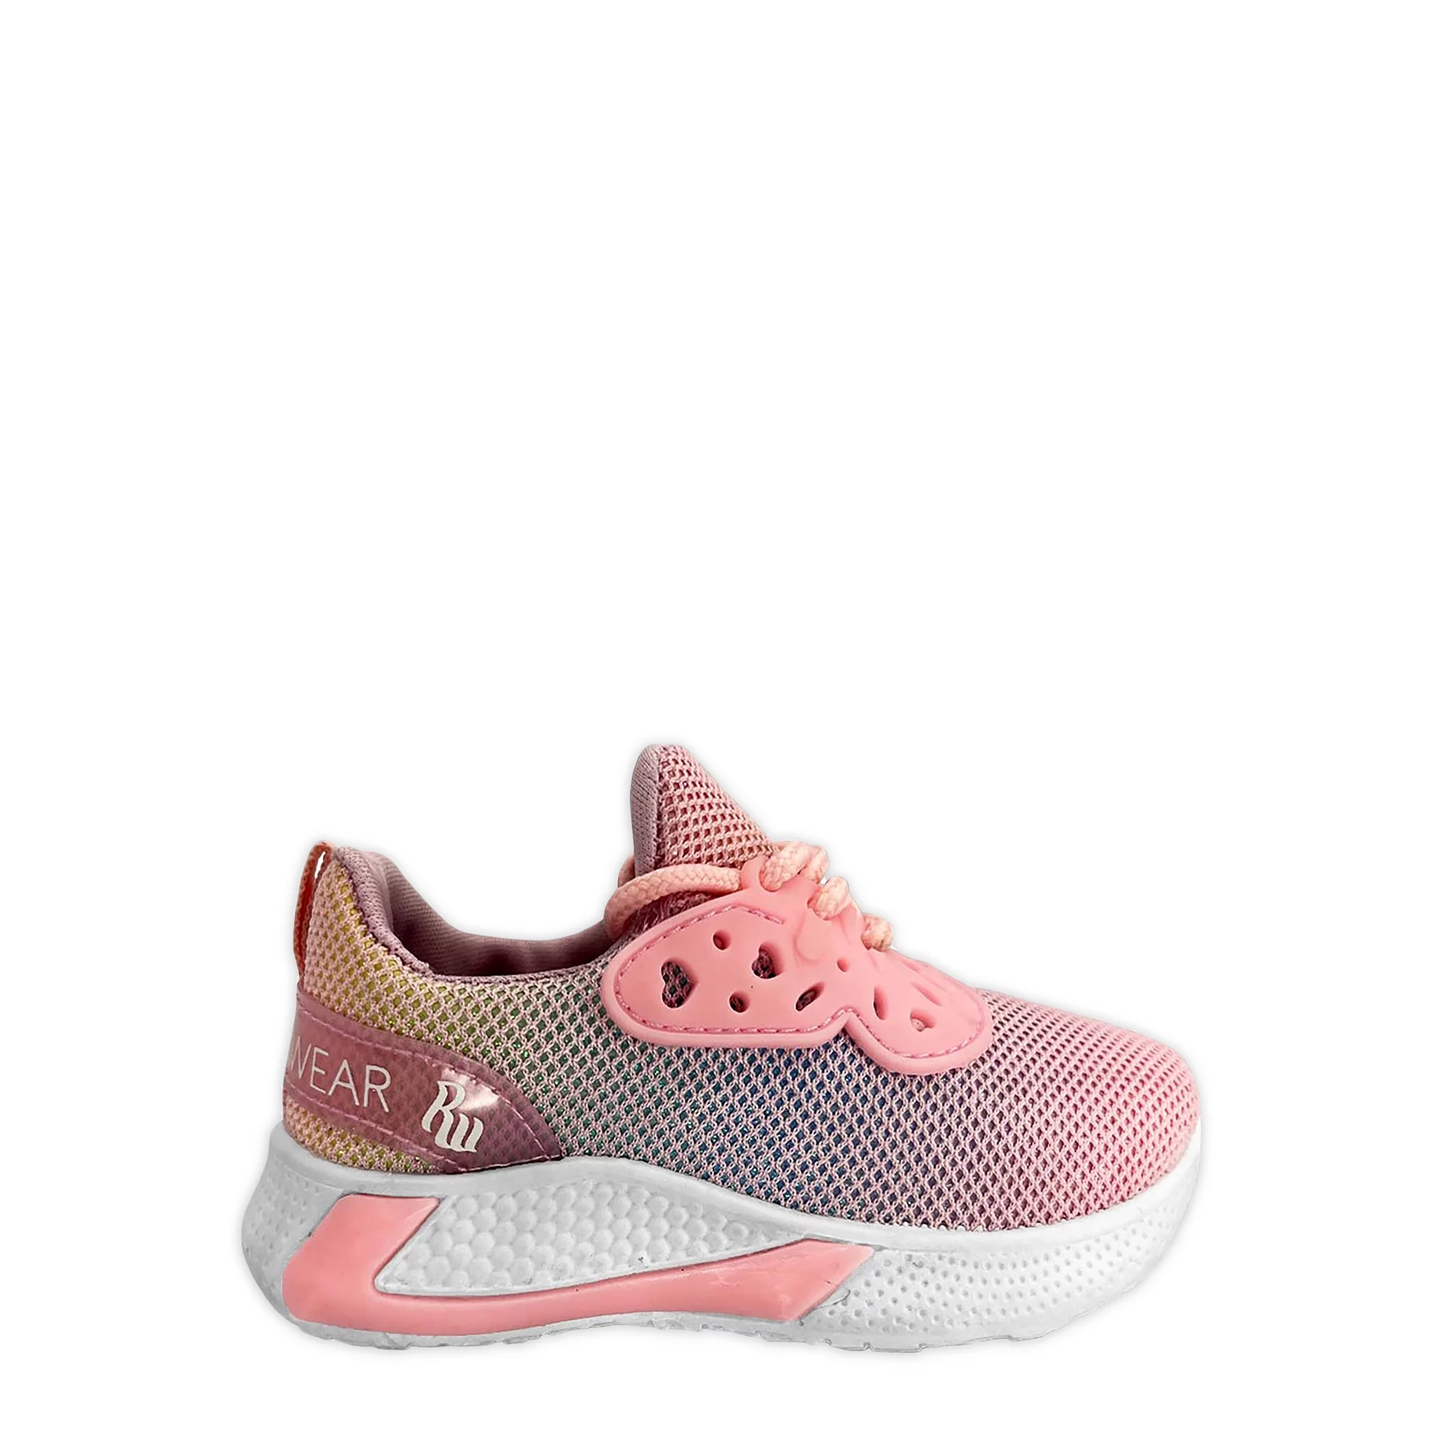 Toddler Girl’s Fashionable  Athletic Sneakers